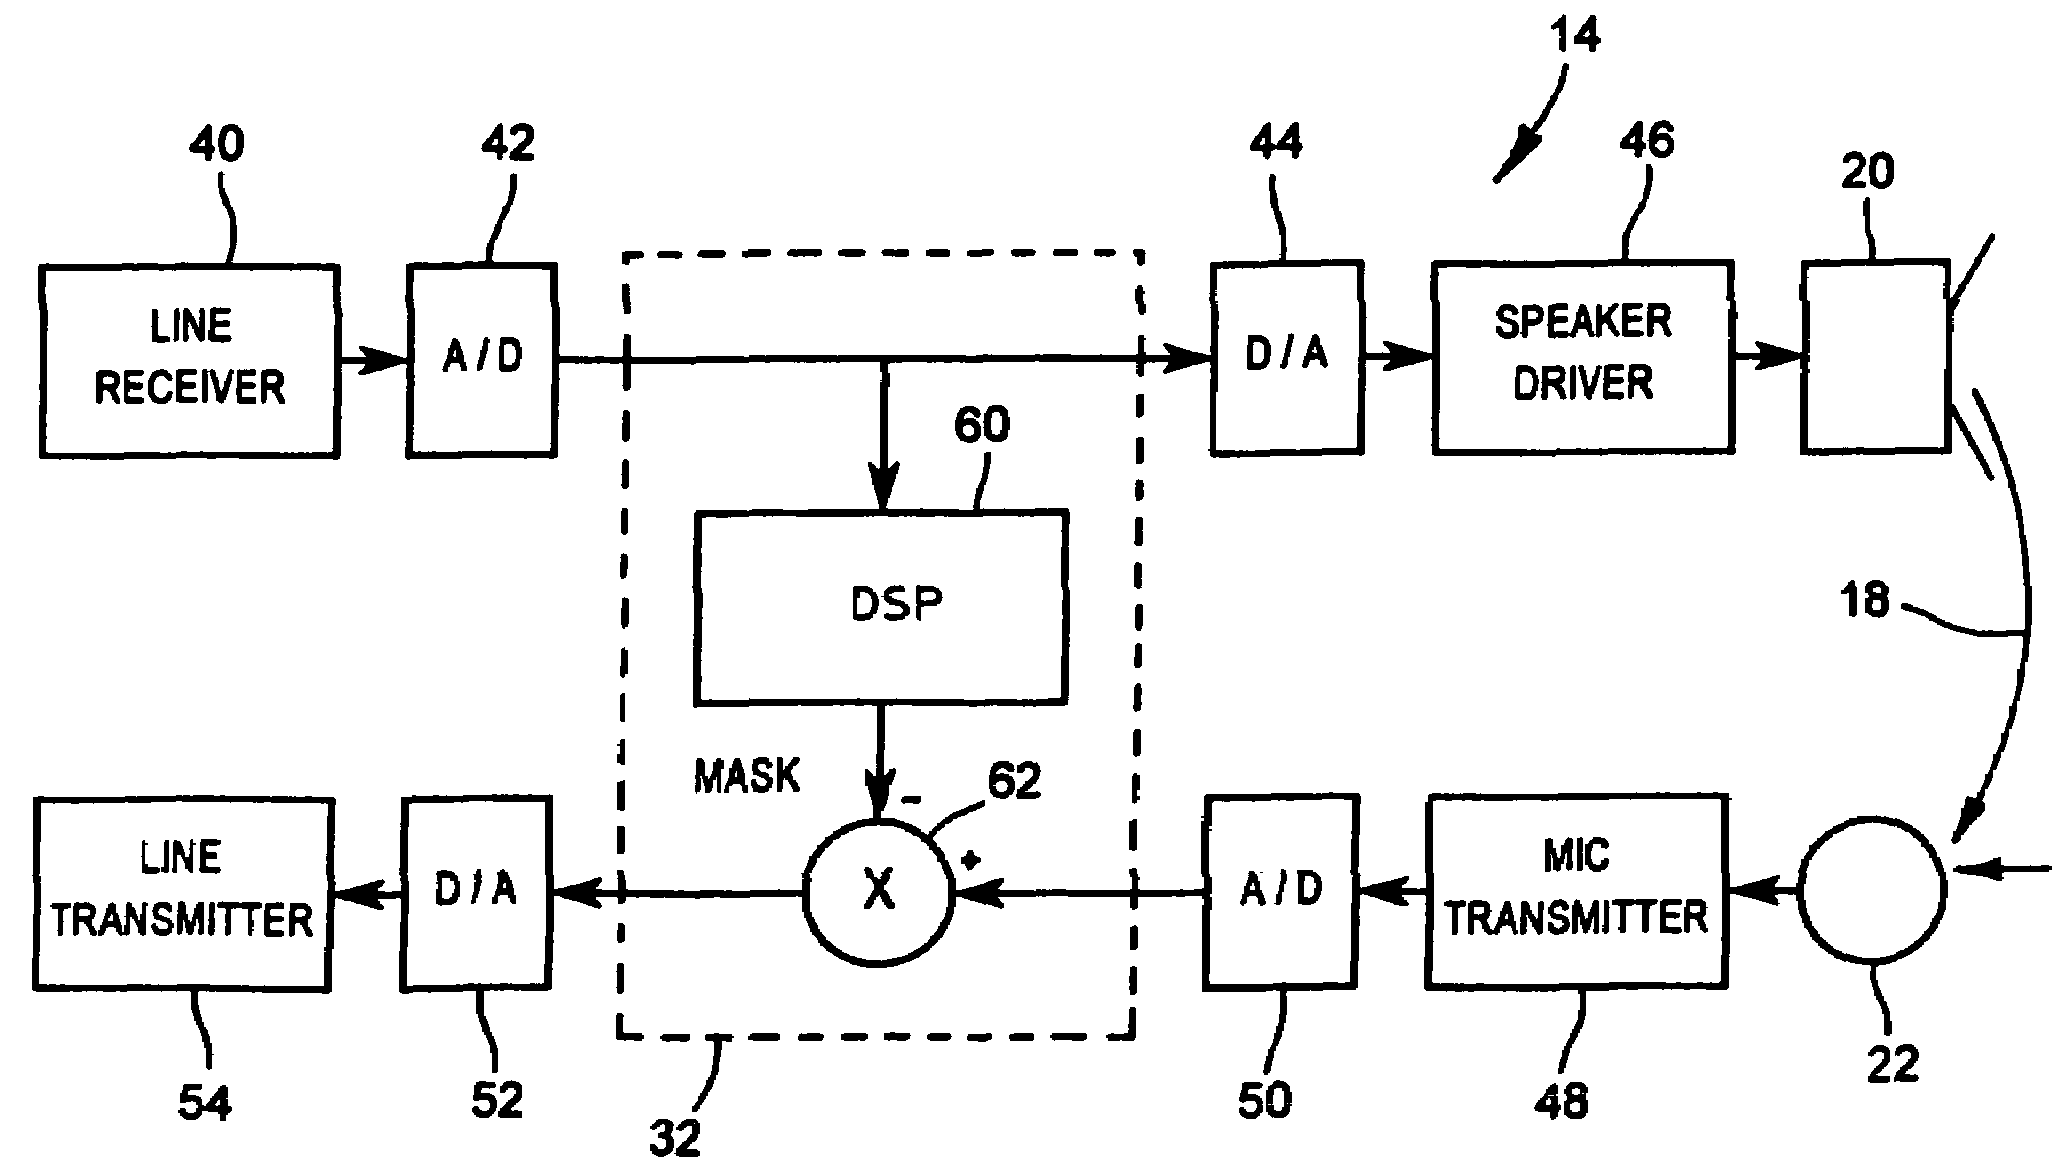 Echo cancellation/suppression and double-talk detection in communication paths